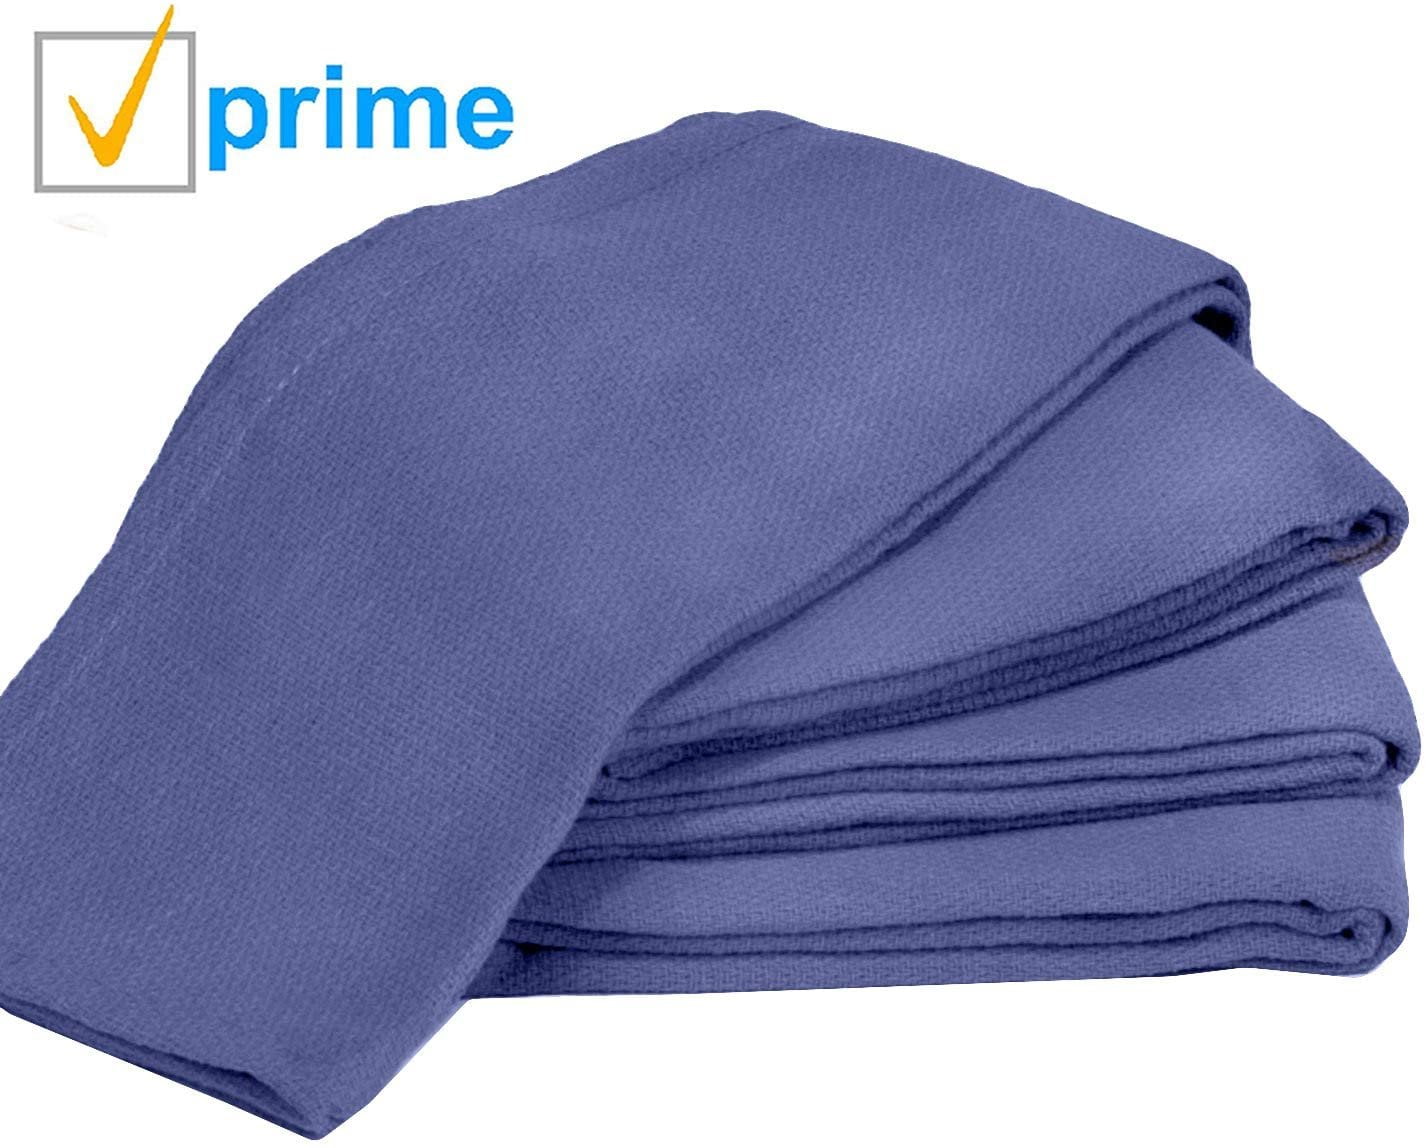 Recycled Surgical Super Absorbent Towel 32in X 16in - Windows101 Europe –  Windows101 BV